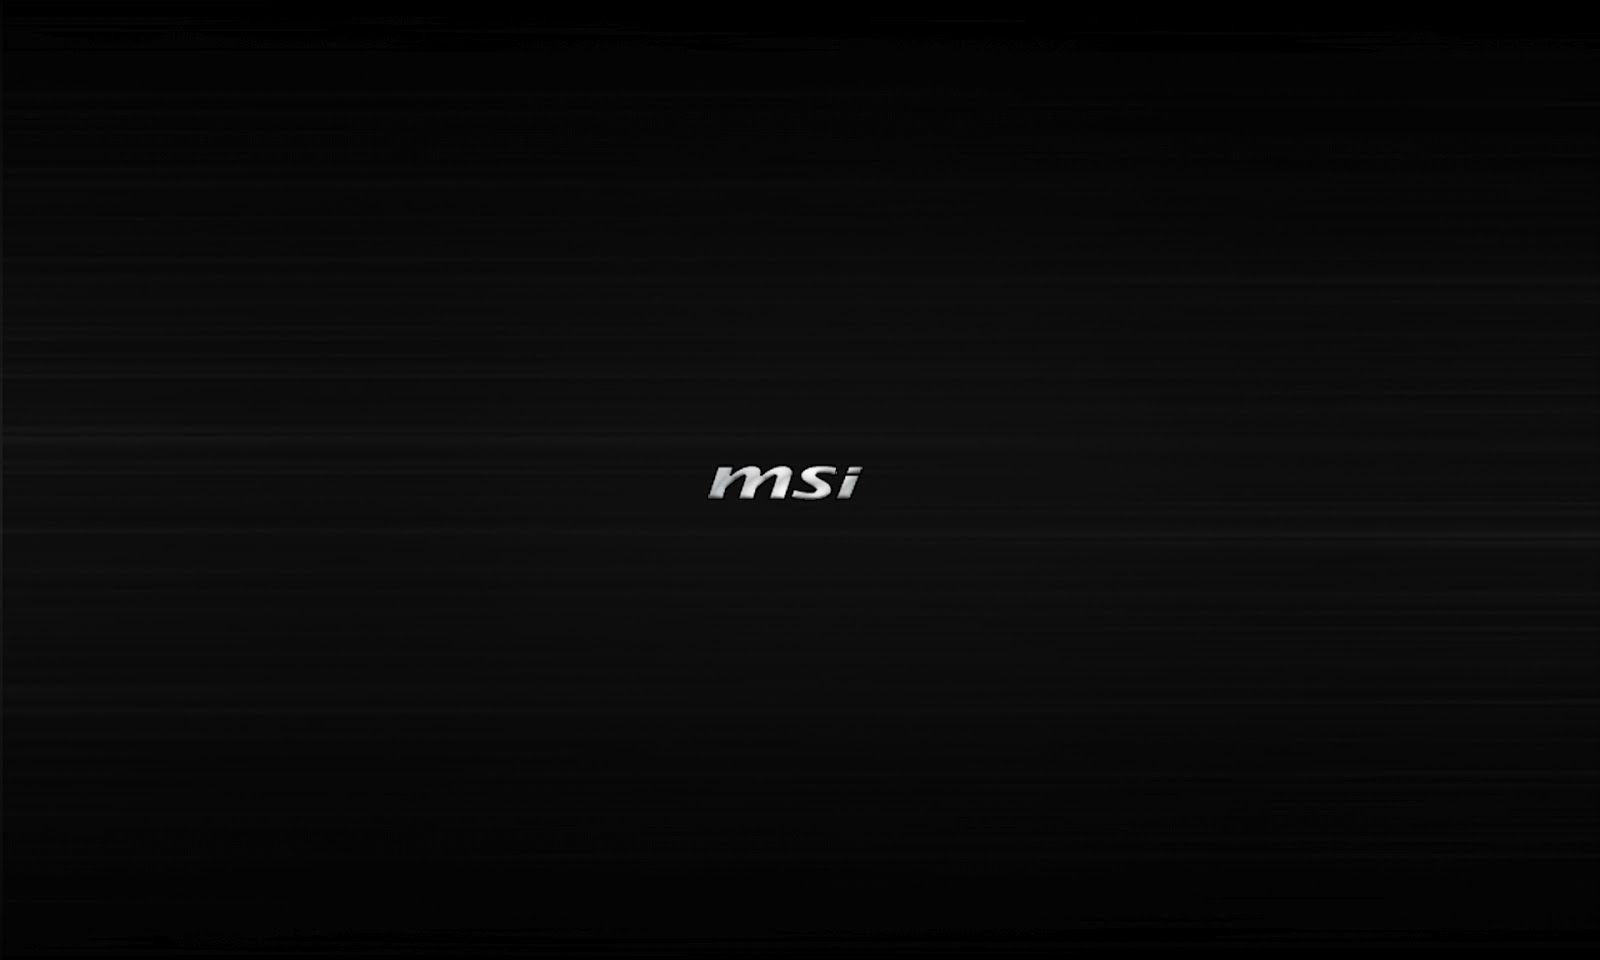 MSI Logo Wallpapers New Best Wallpapers 2011 indexwallpaper